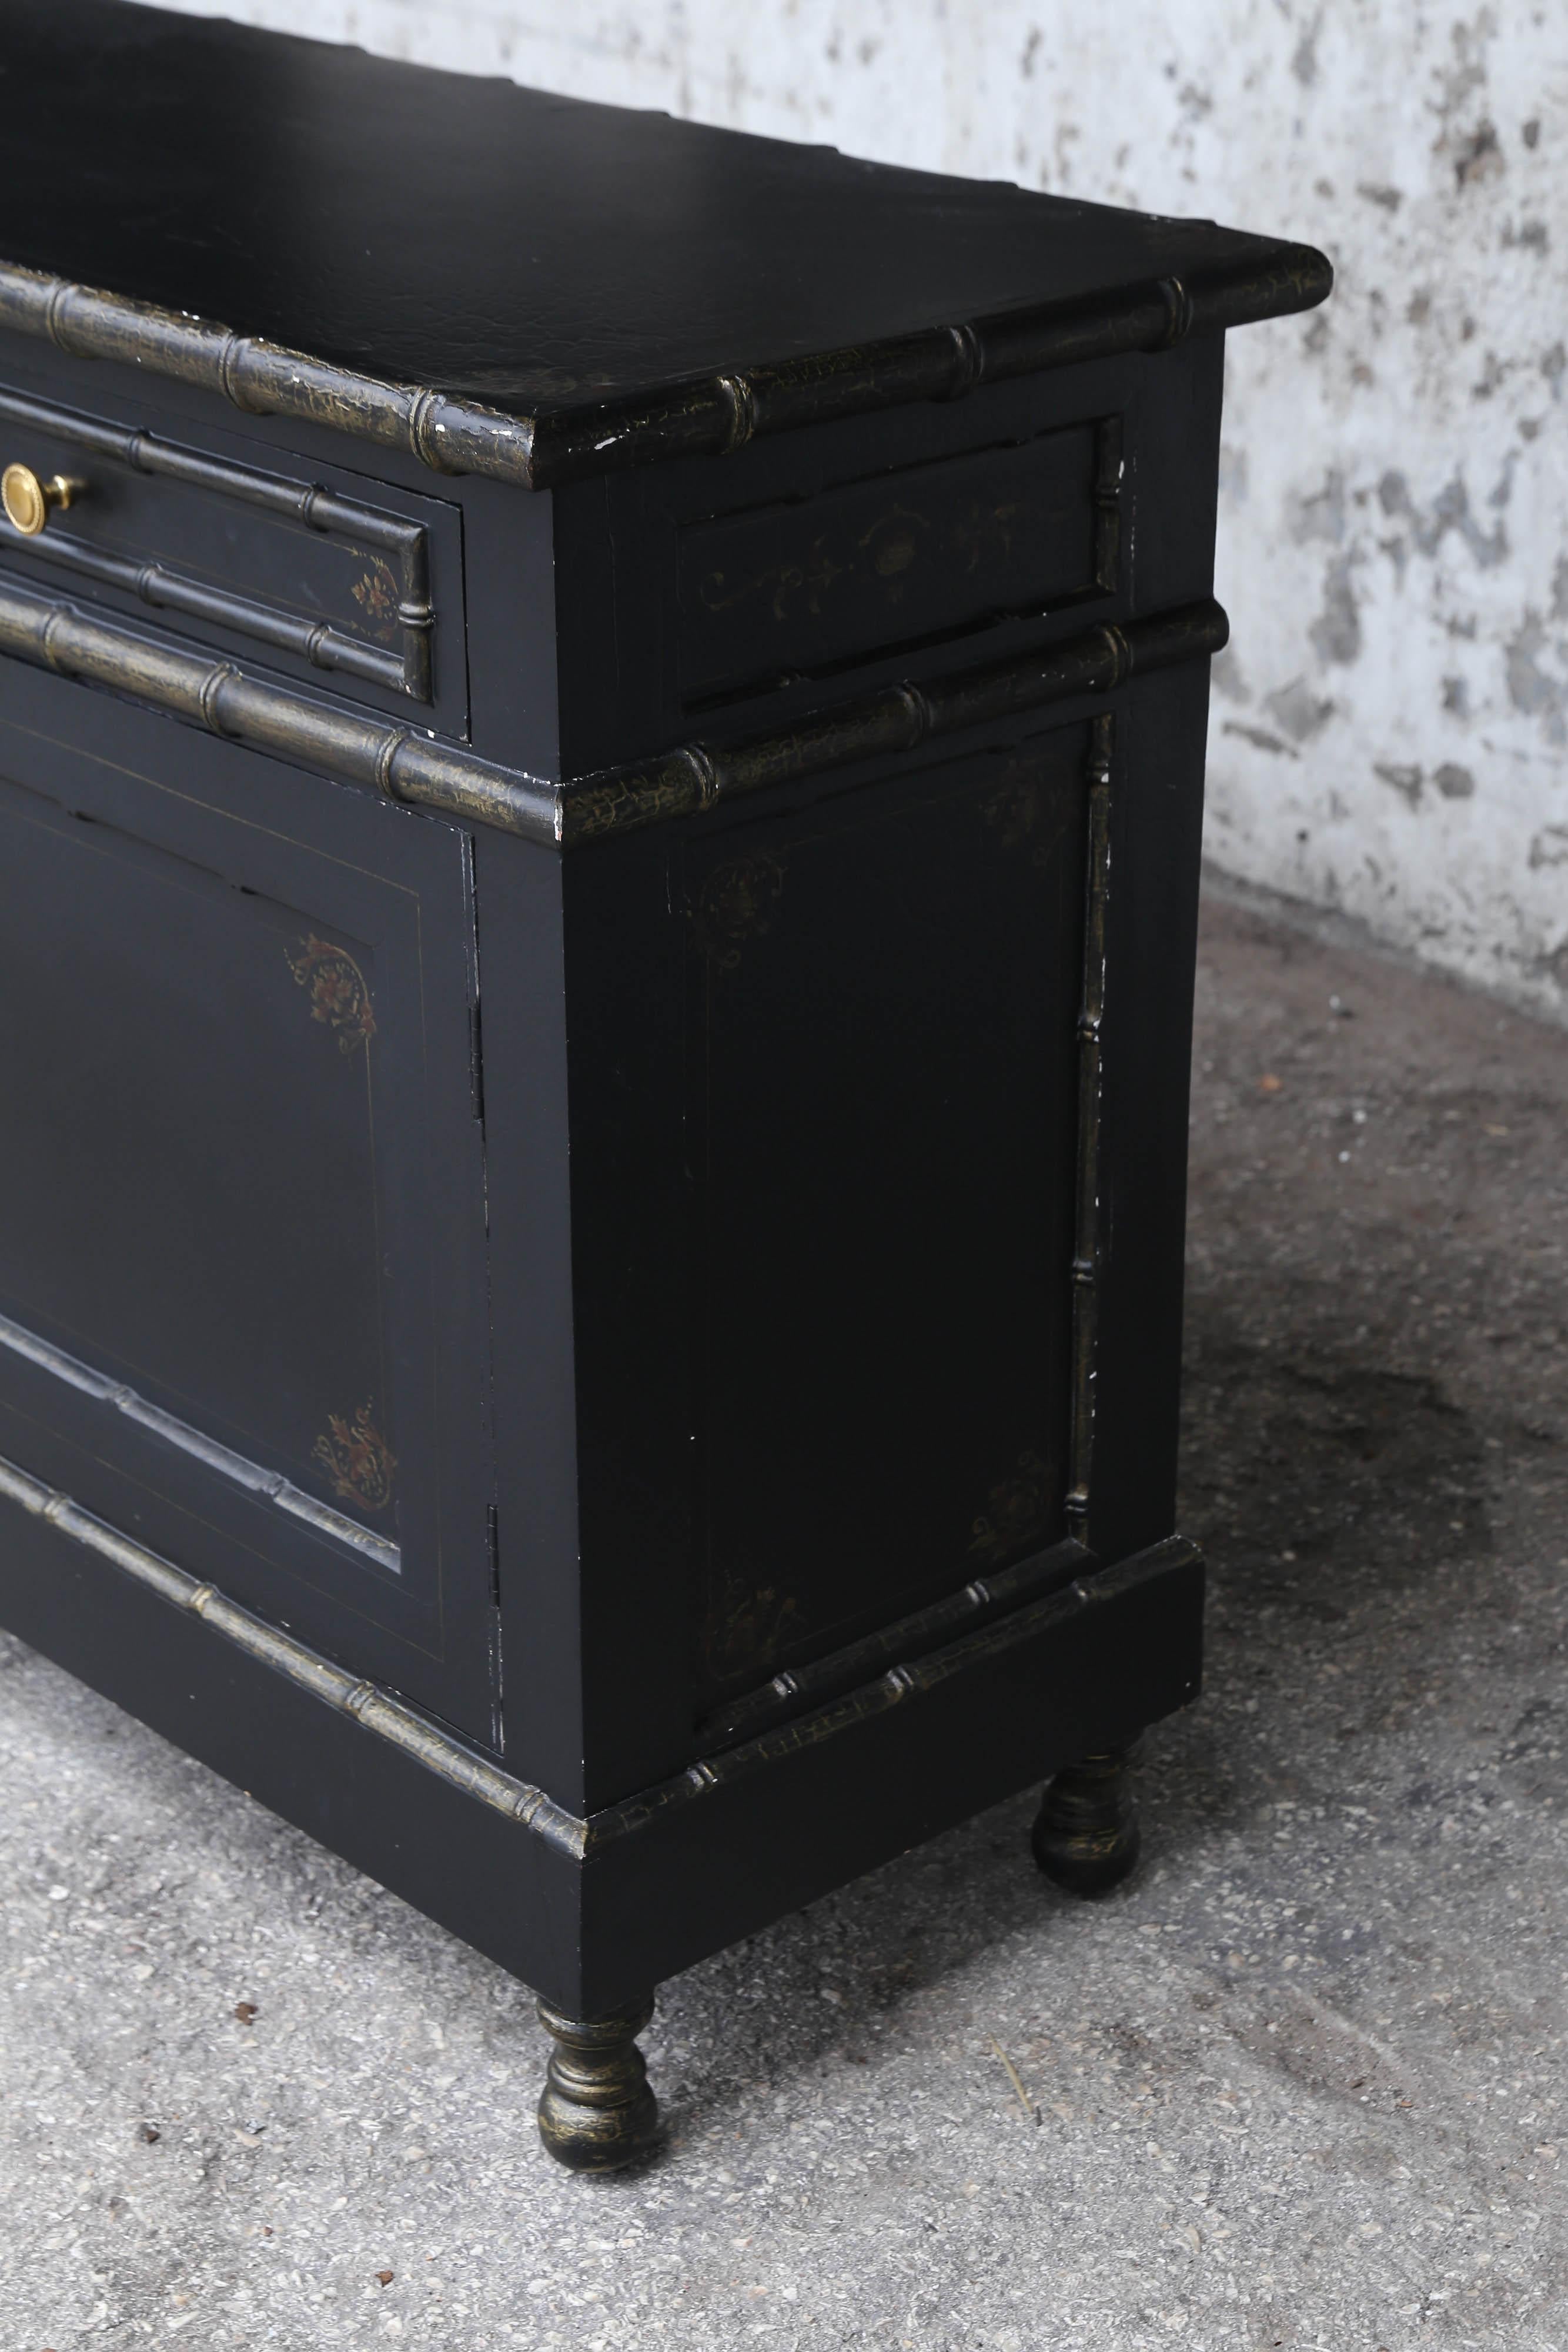 Vintage faux bamboo black painted credenza features two doors and two drawers with gold paint accentuating the shapes of bamboo.
Faint gold patterns are painted on credenza top and front of two doors.
Credenza sits upon 4 low turned legs and has